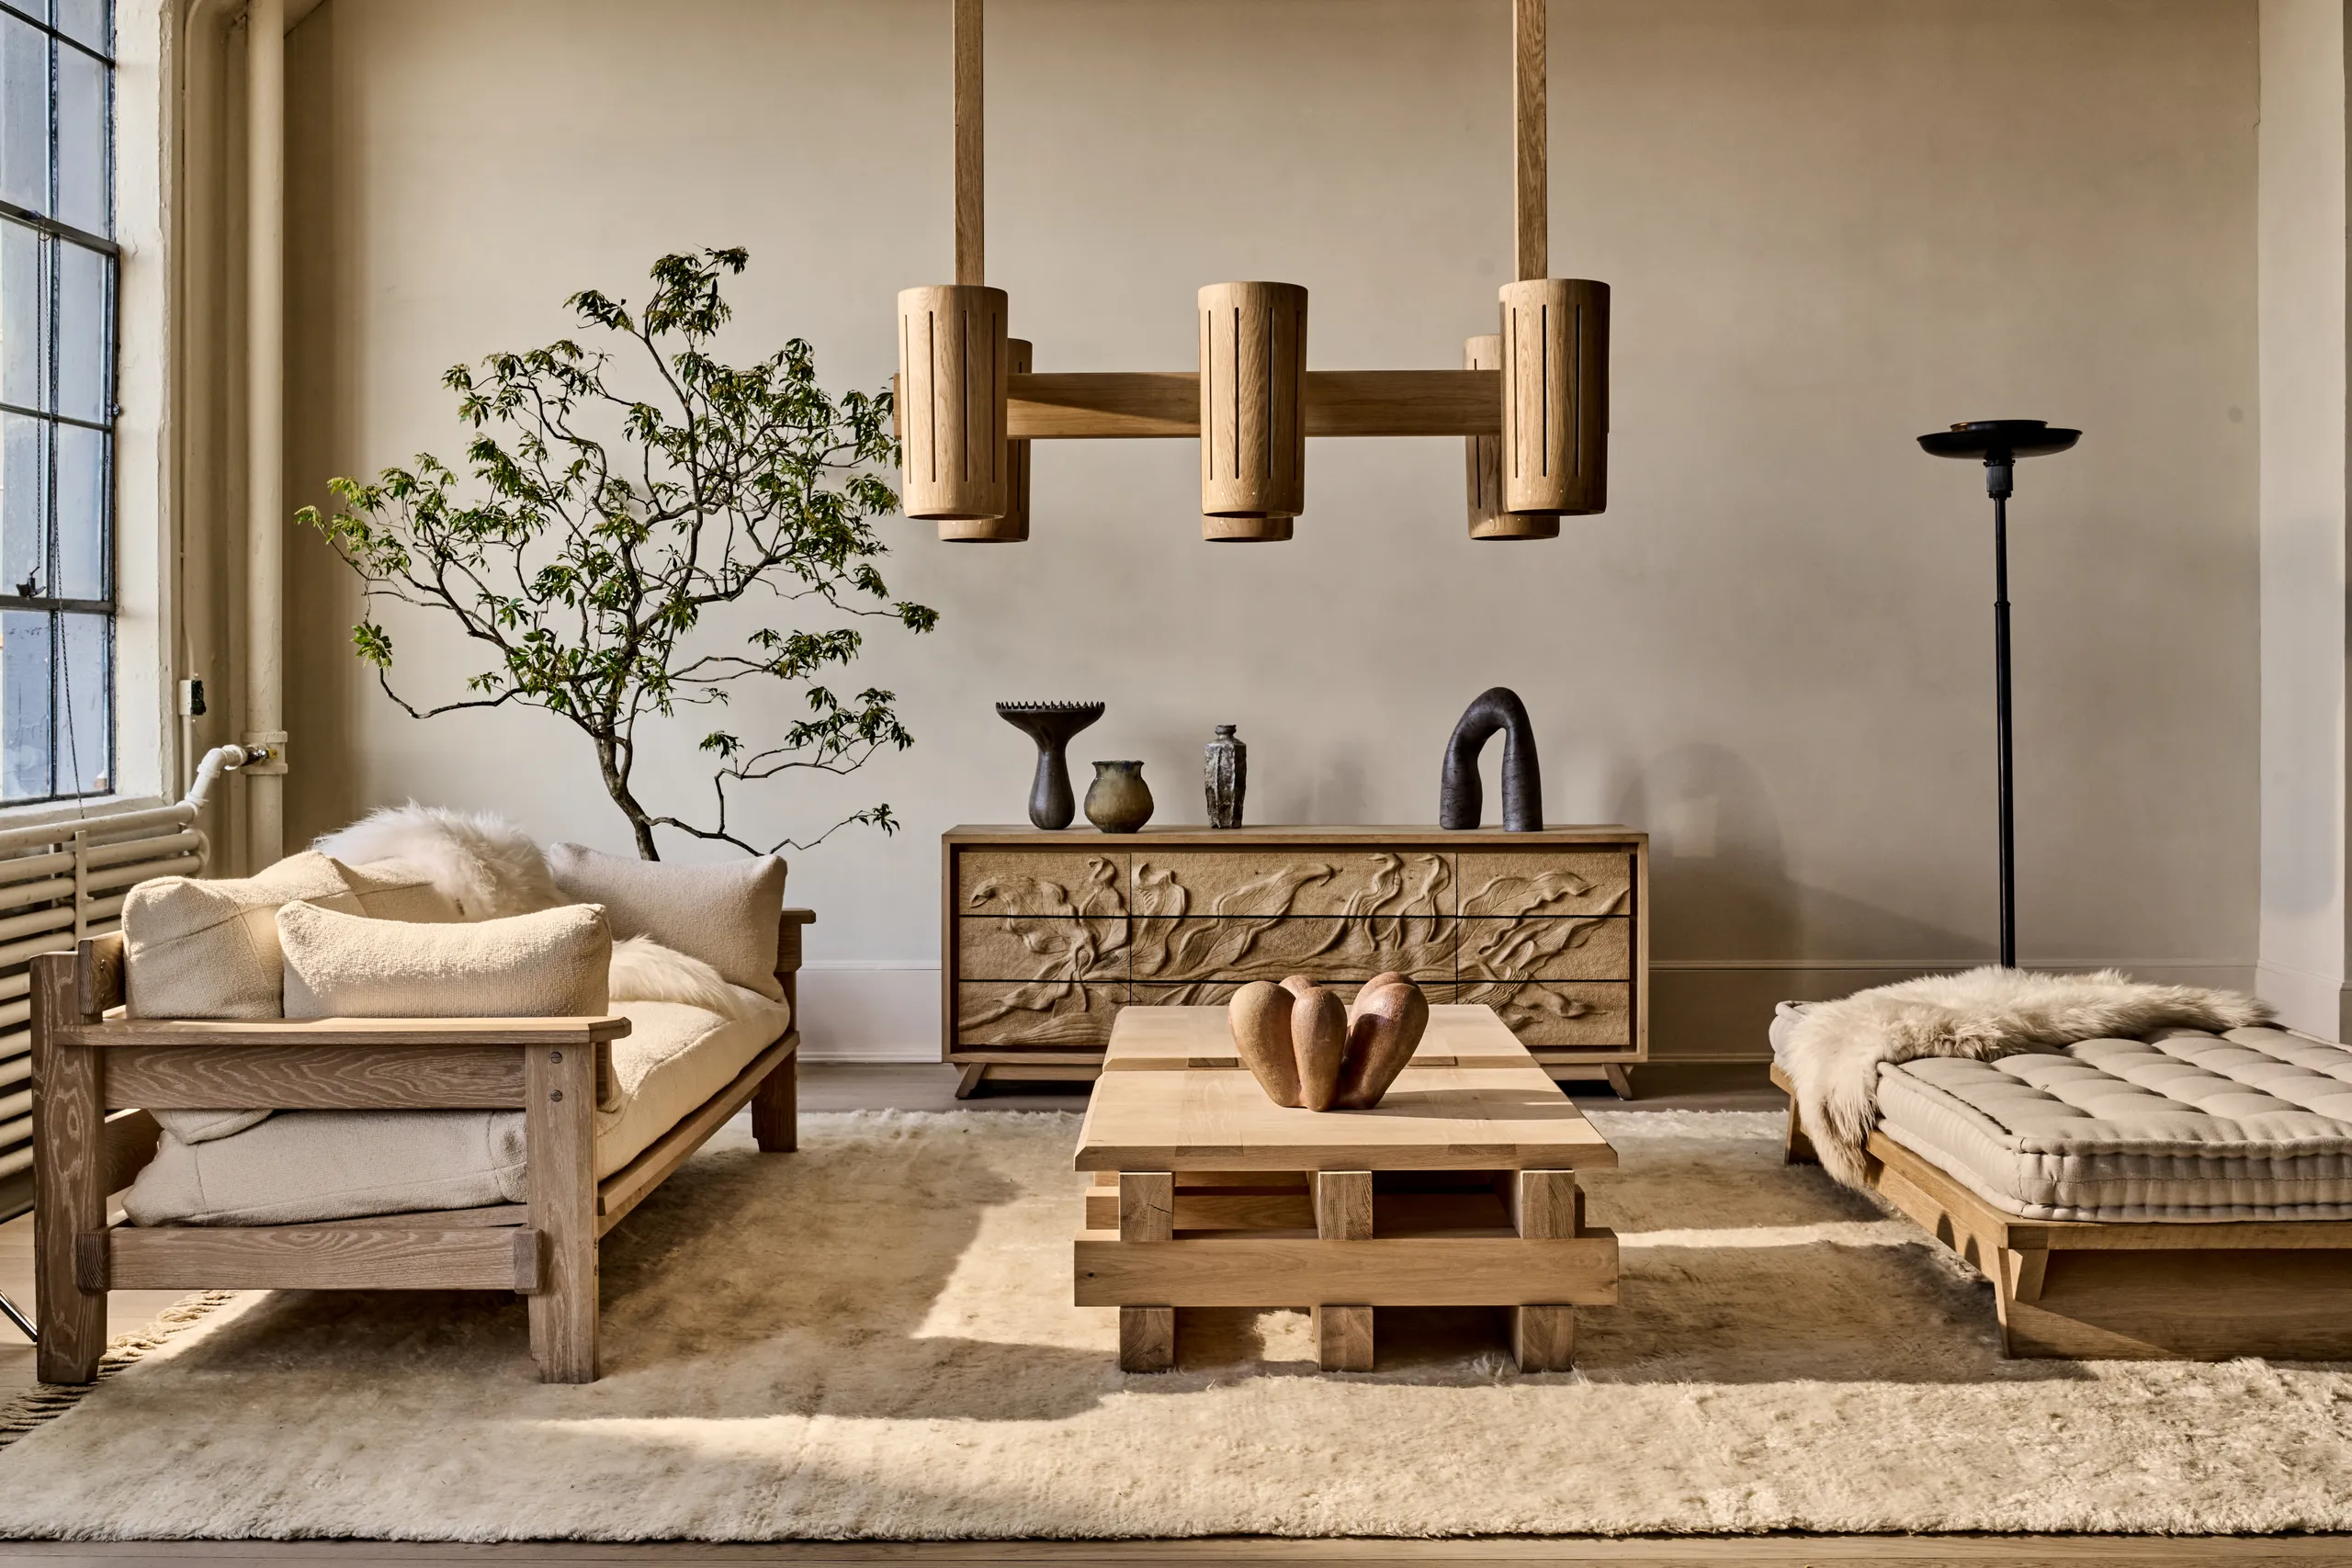 "Japandi" is a blend of Japanese and Scandinavian styles in interior design